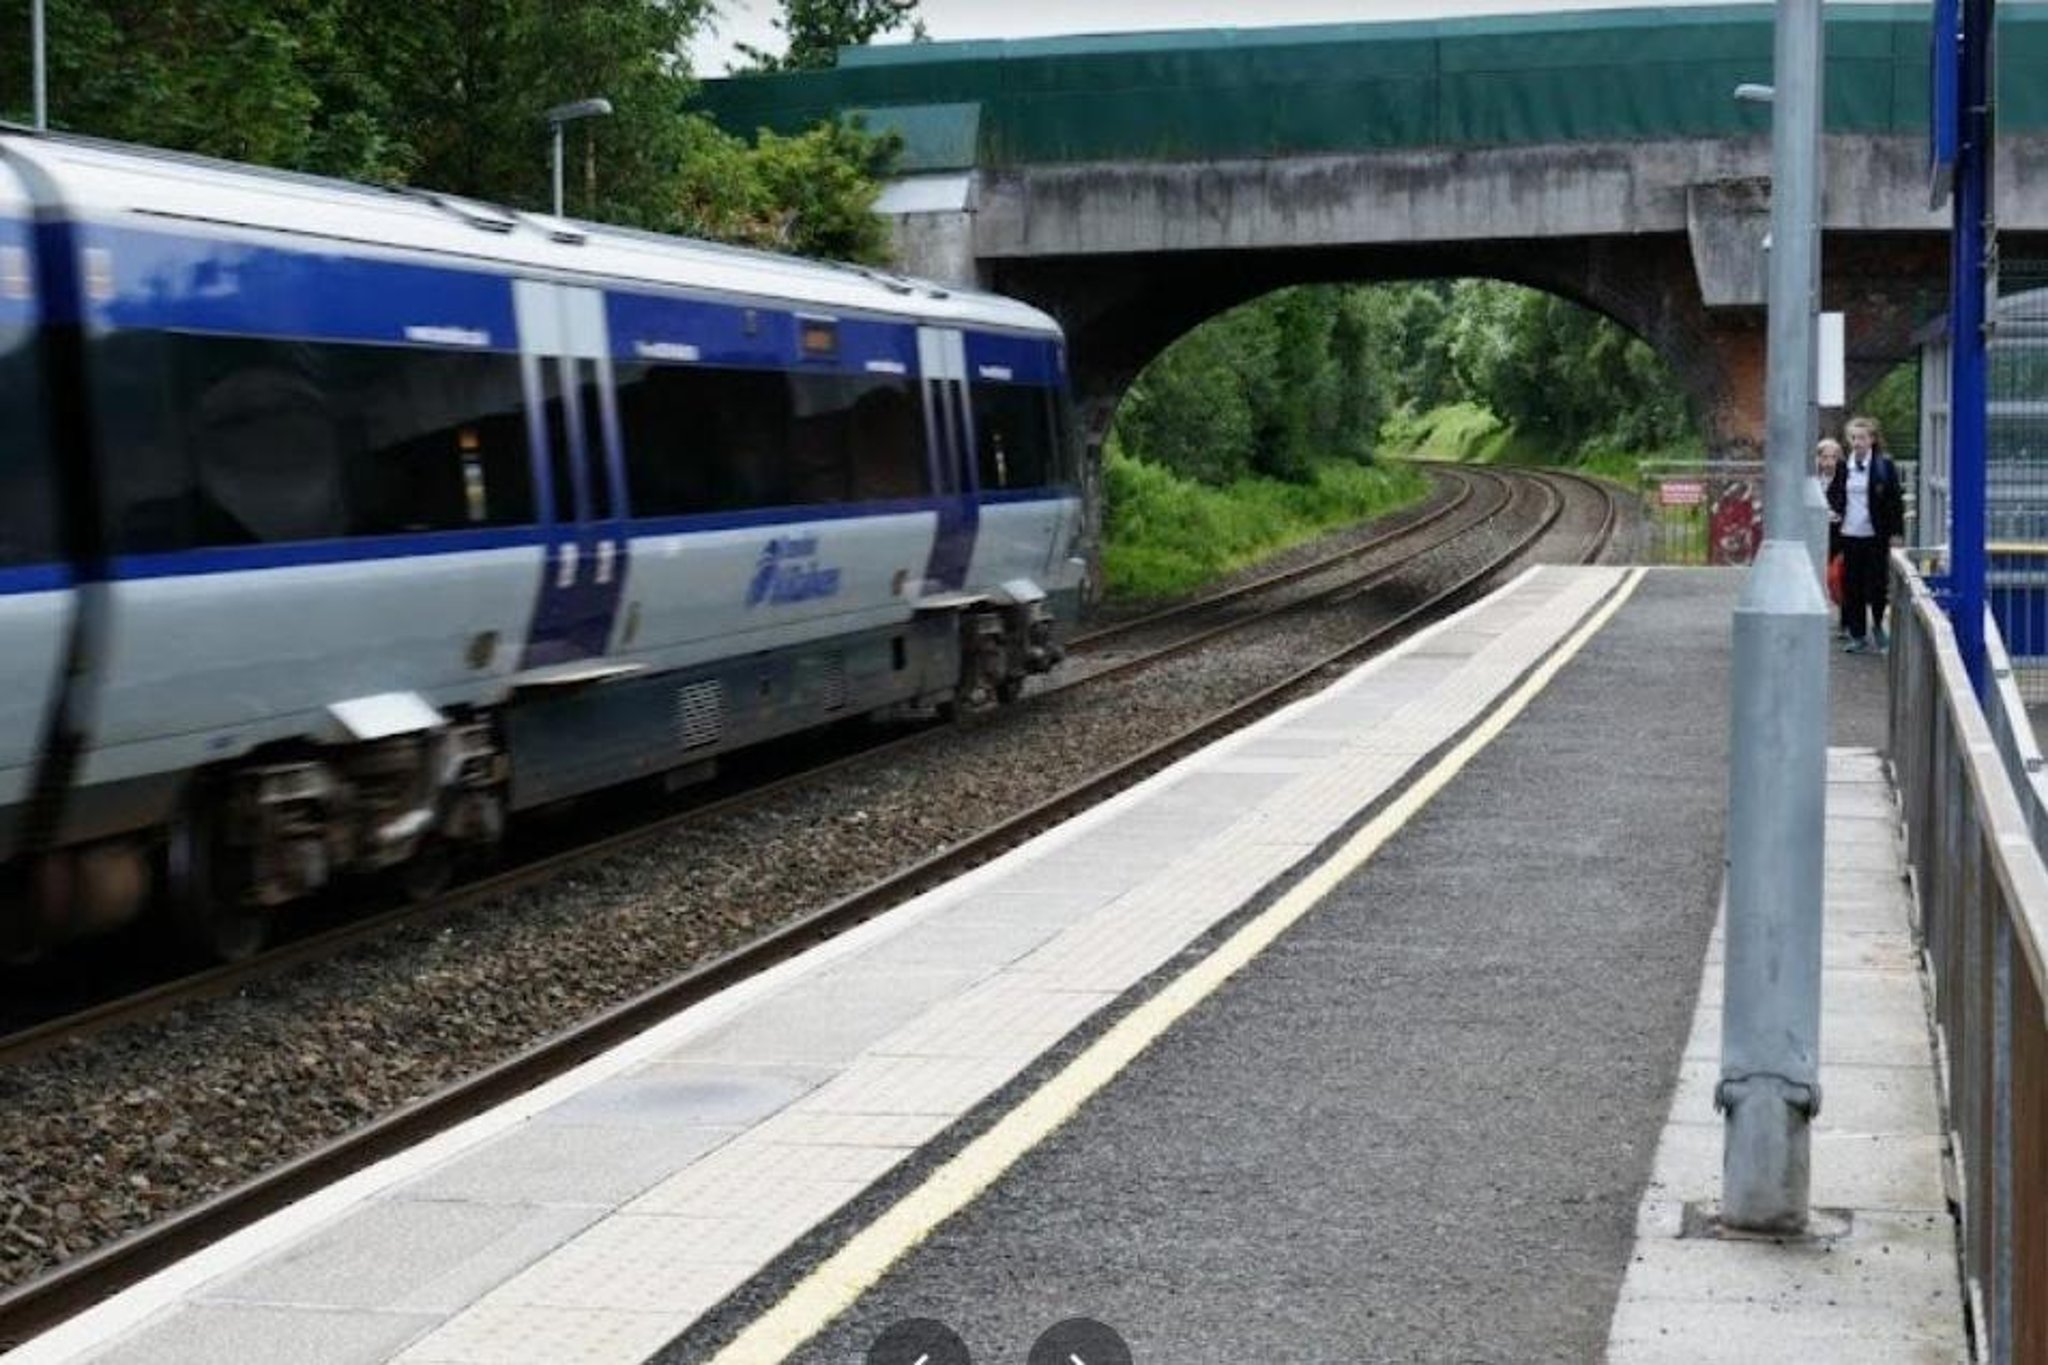 Homes evacuated after suspicious object discovered at NI train station